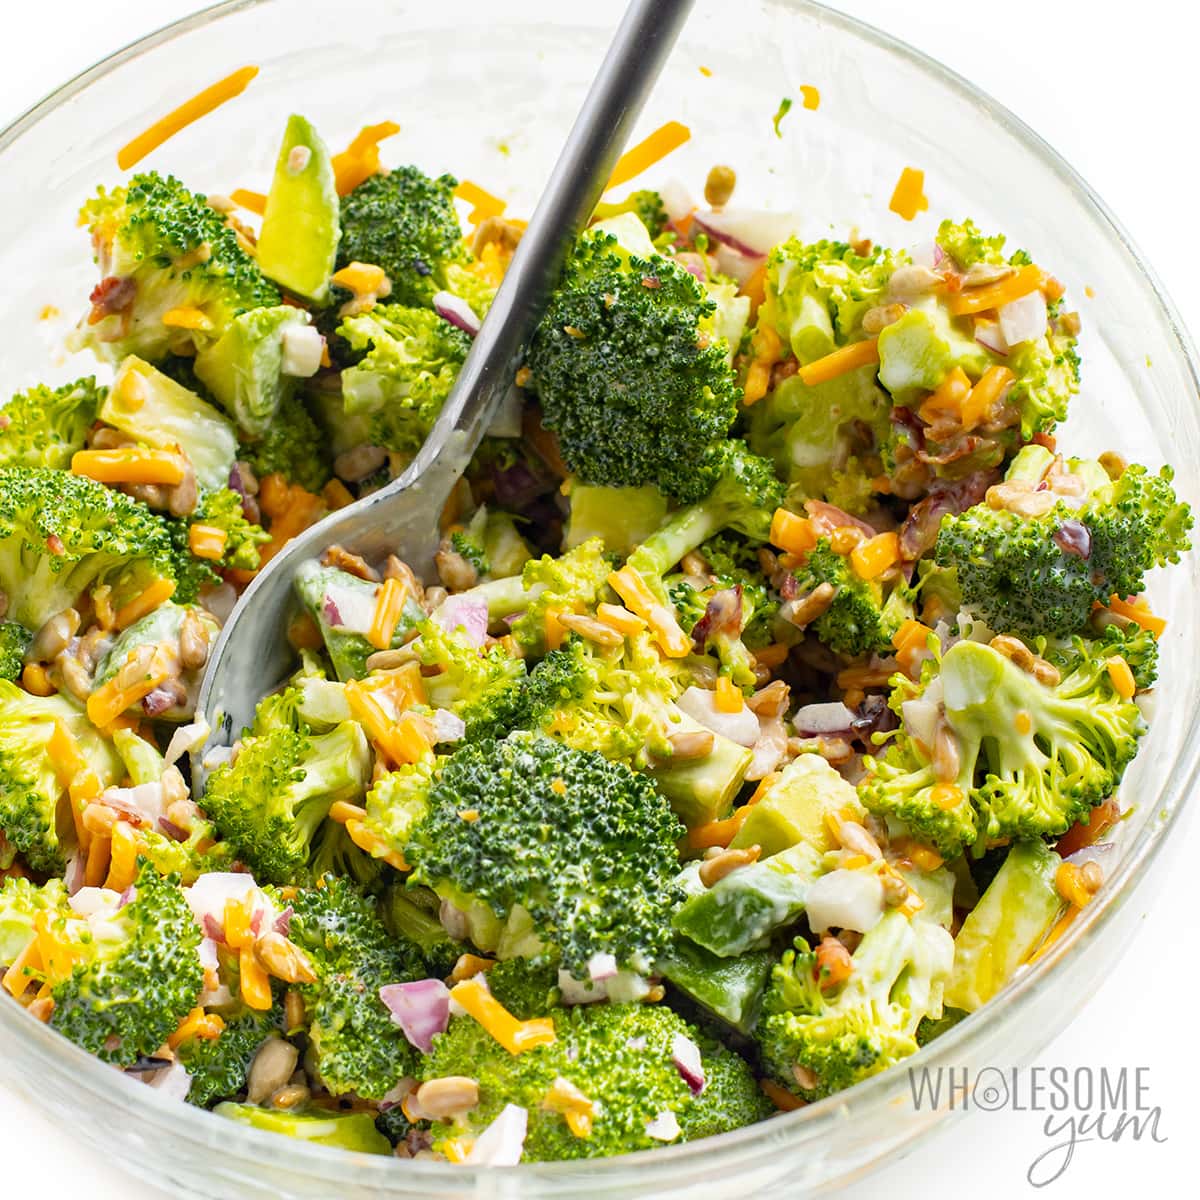 Low carb broccoli salad with bacon, dressing, and avocado mixed in.